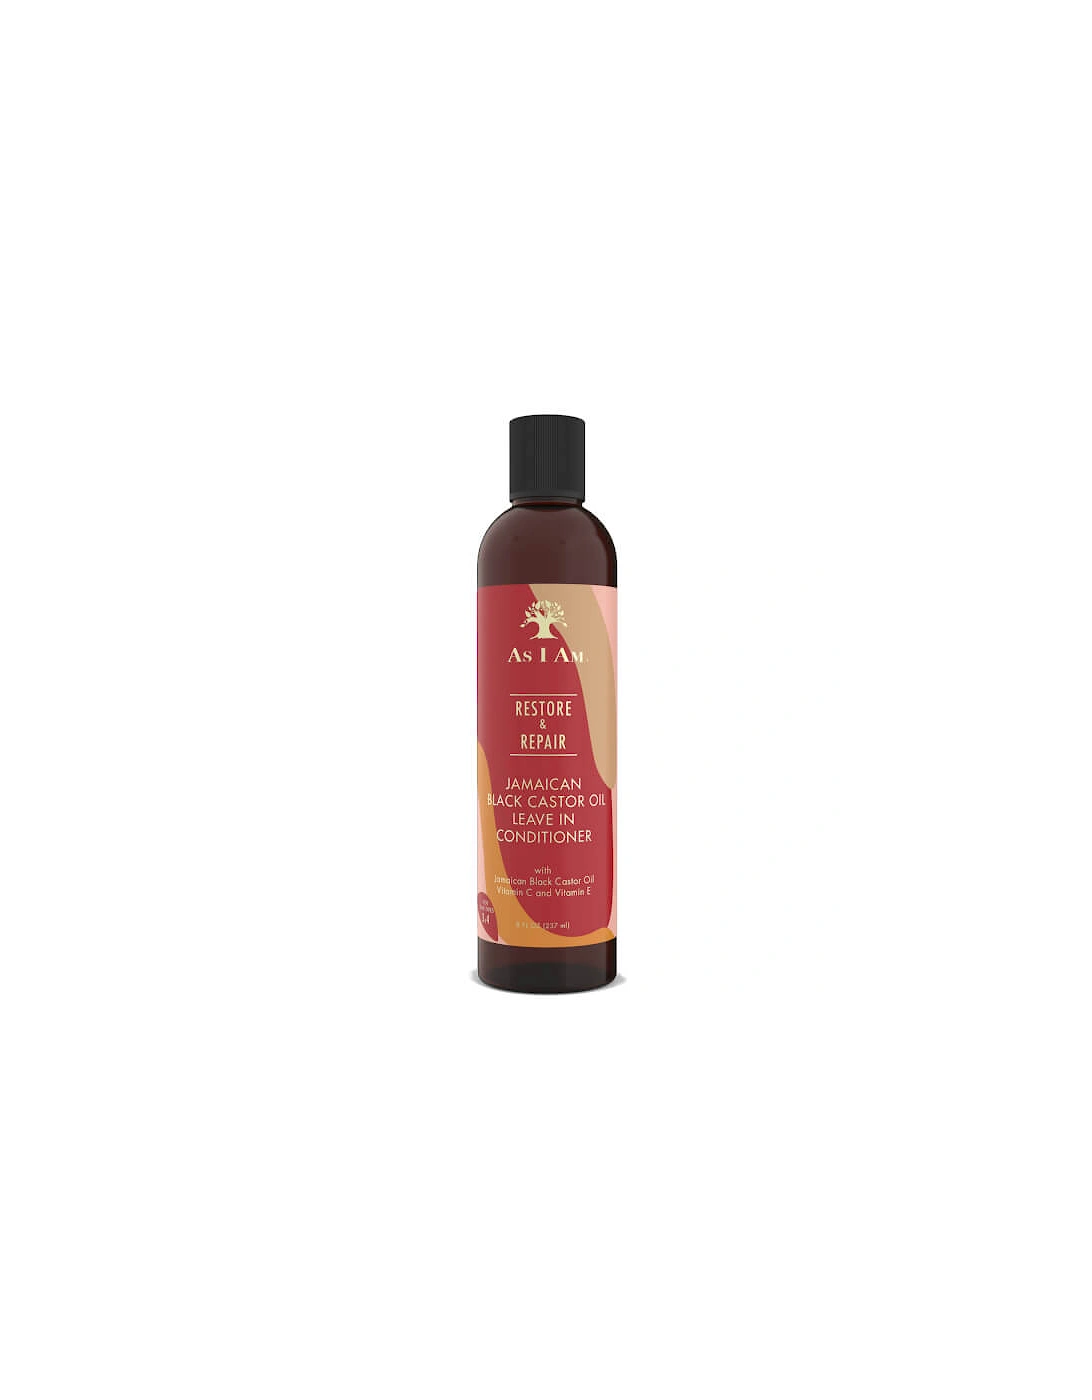 Jamaican Black Castor Oil Leave in Conditioner - As I Am, 2 of 1